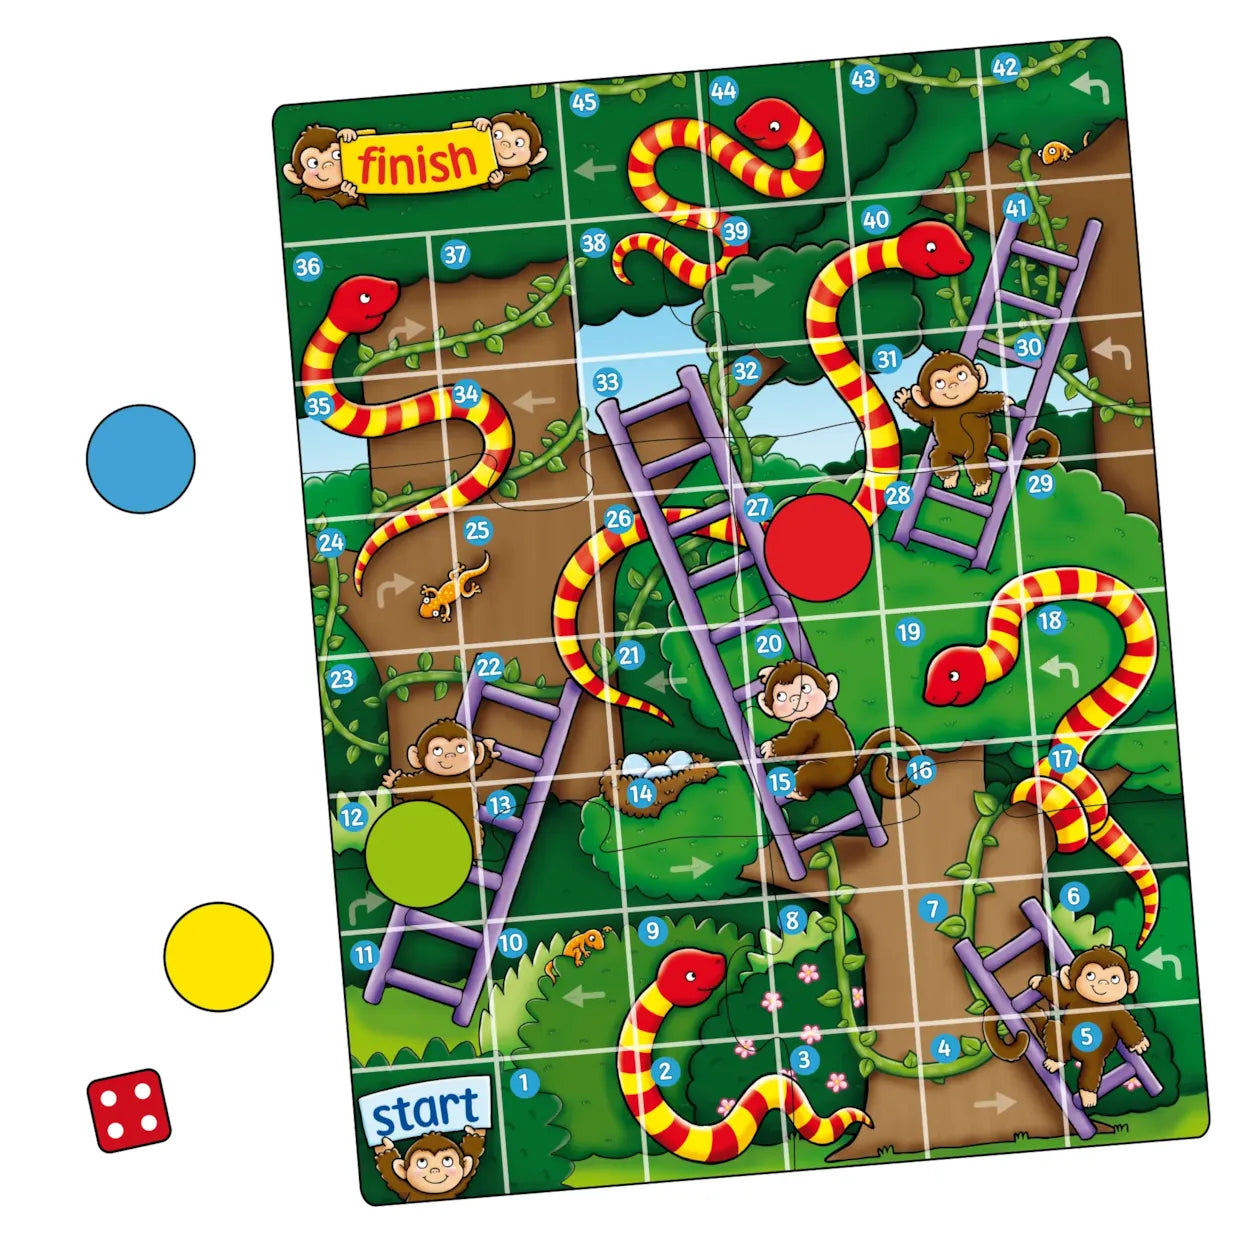 Jungle Snakes and Ladders - The English Bookshop